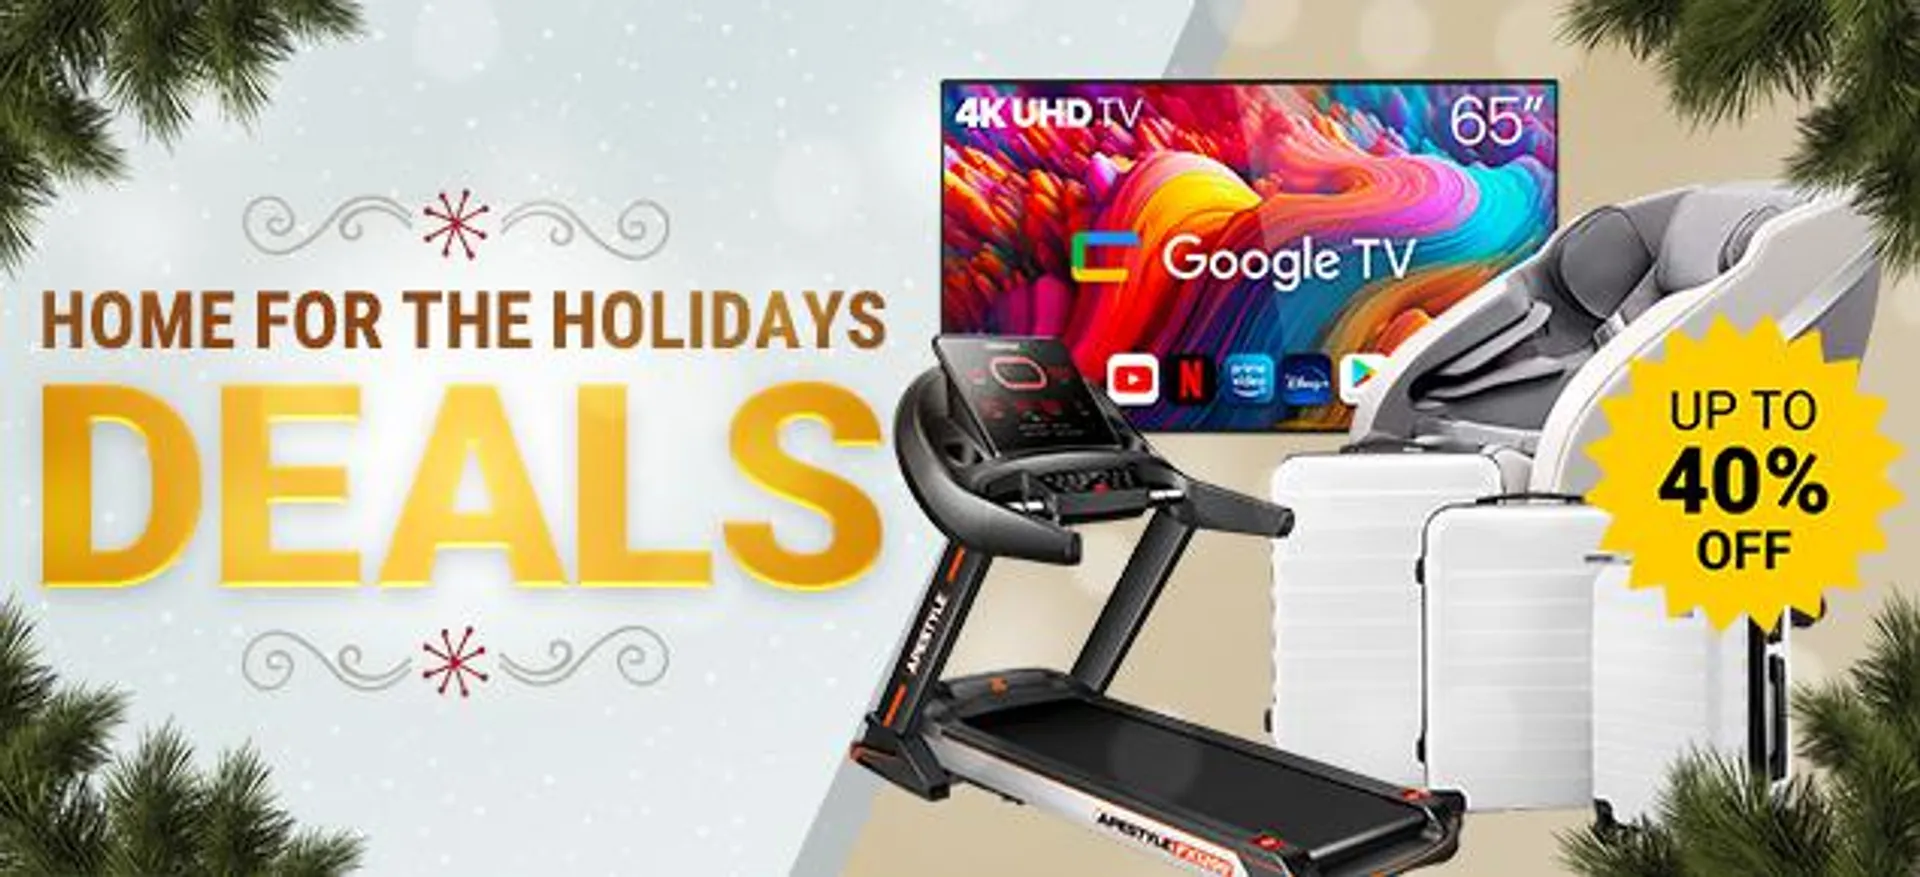 Home for The Holidays Deals